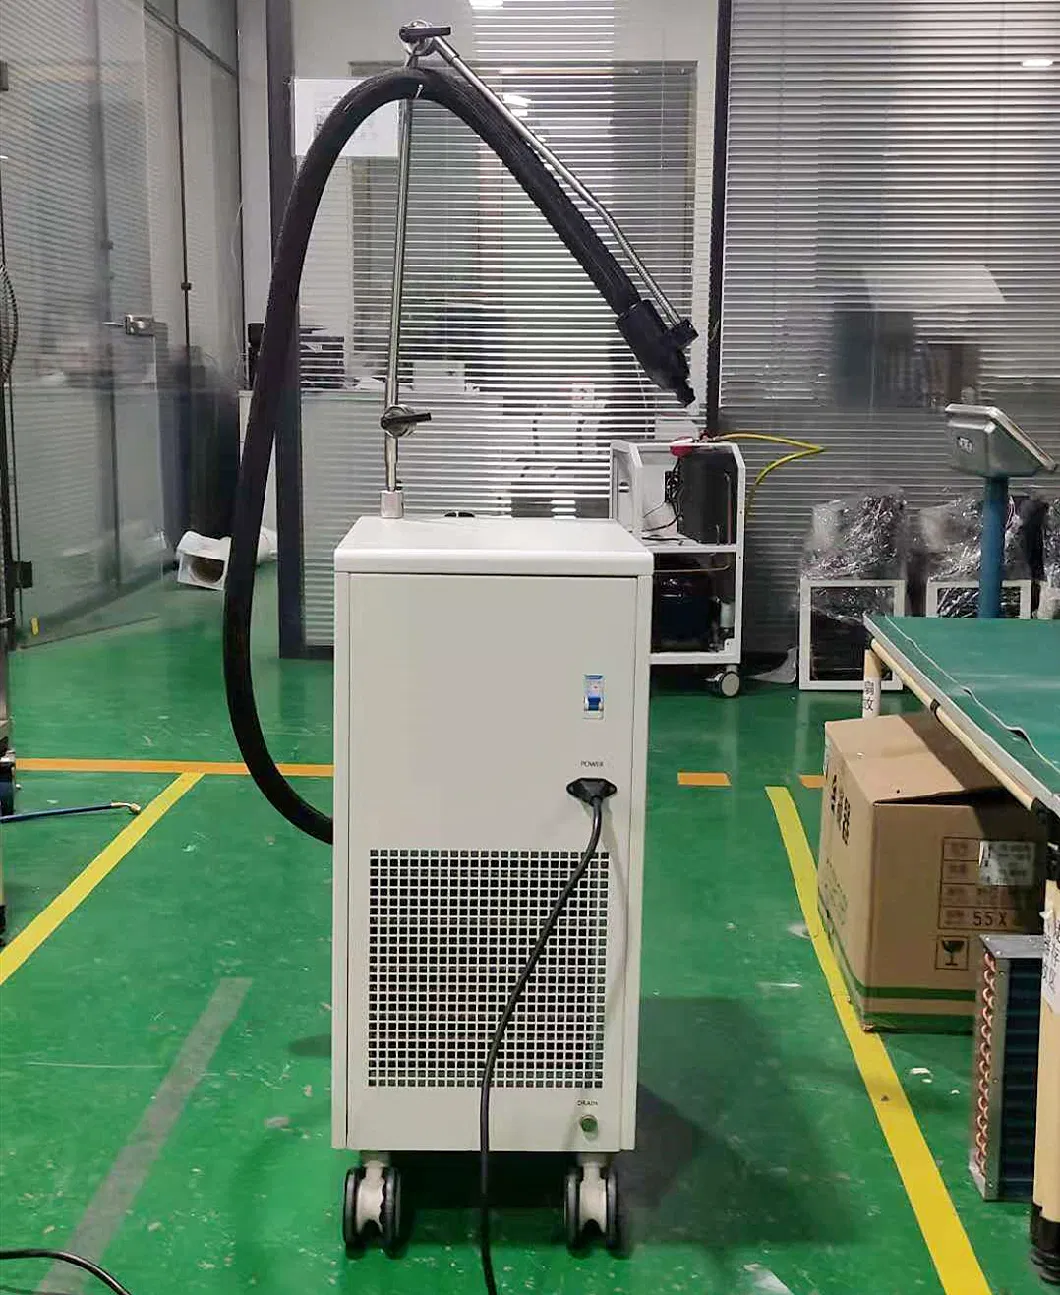 Air Cooling Machine Laser Medical with Compressor Air Skin Cooling Zimmer Cryo Cold Skin Cooling Machine for ND YAG Reduce Pain